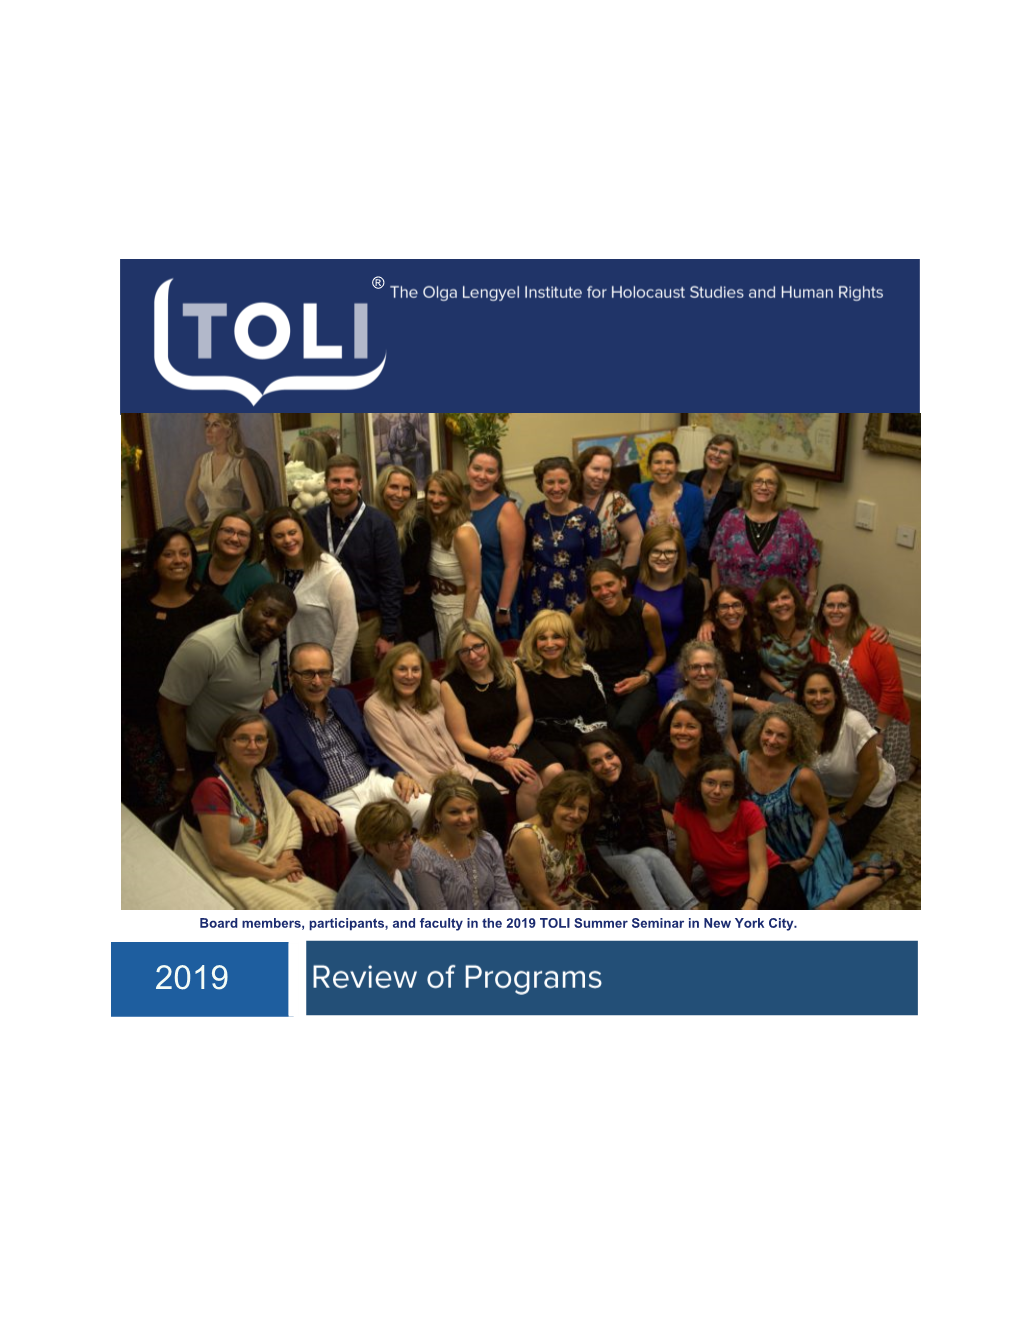 Board Members, Participants, and Faculty in the 2019 TOLI Summer Seminar in New York City